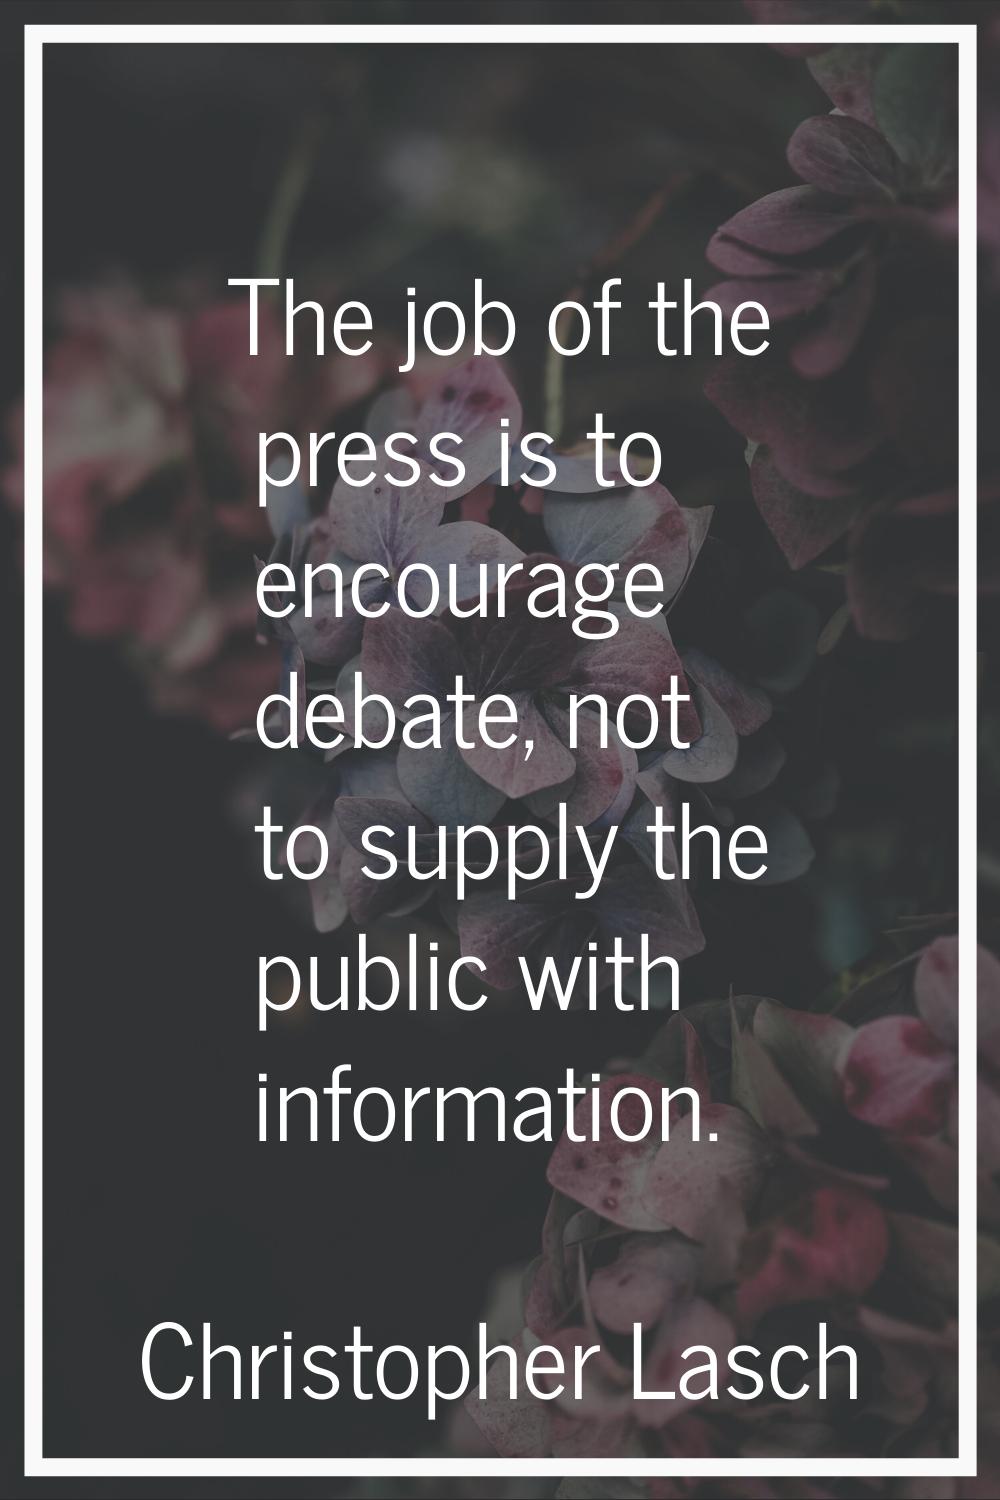 The job of the press is to encourage debate, not to supply the public with information.